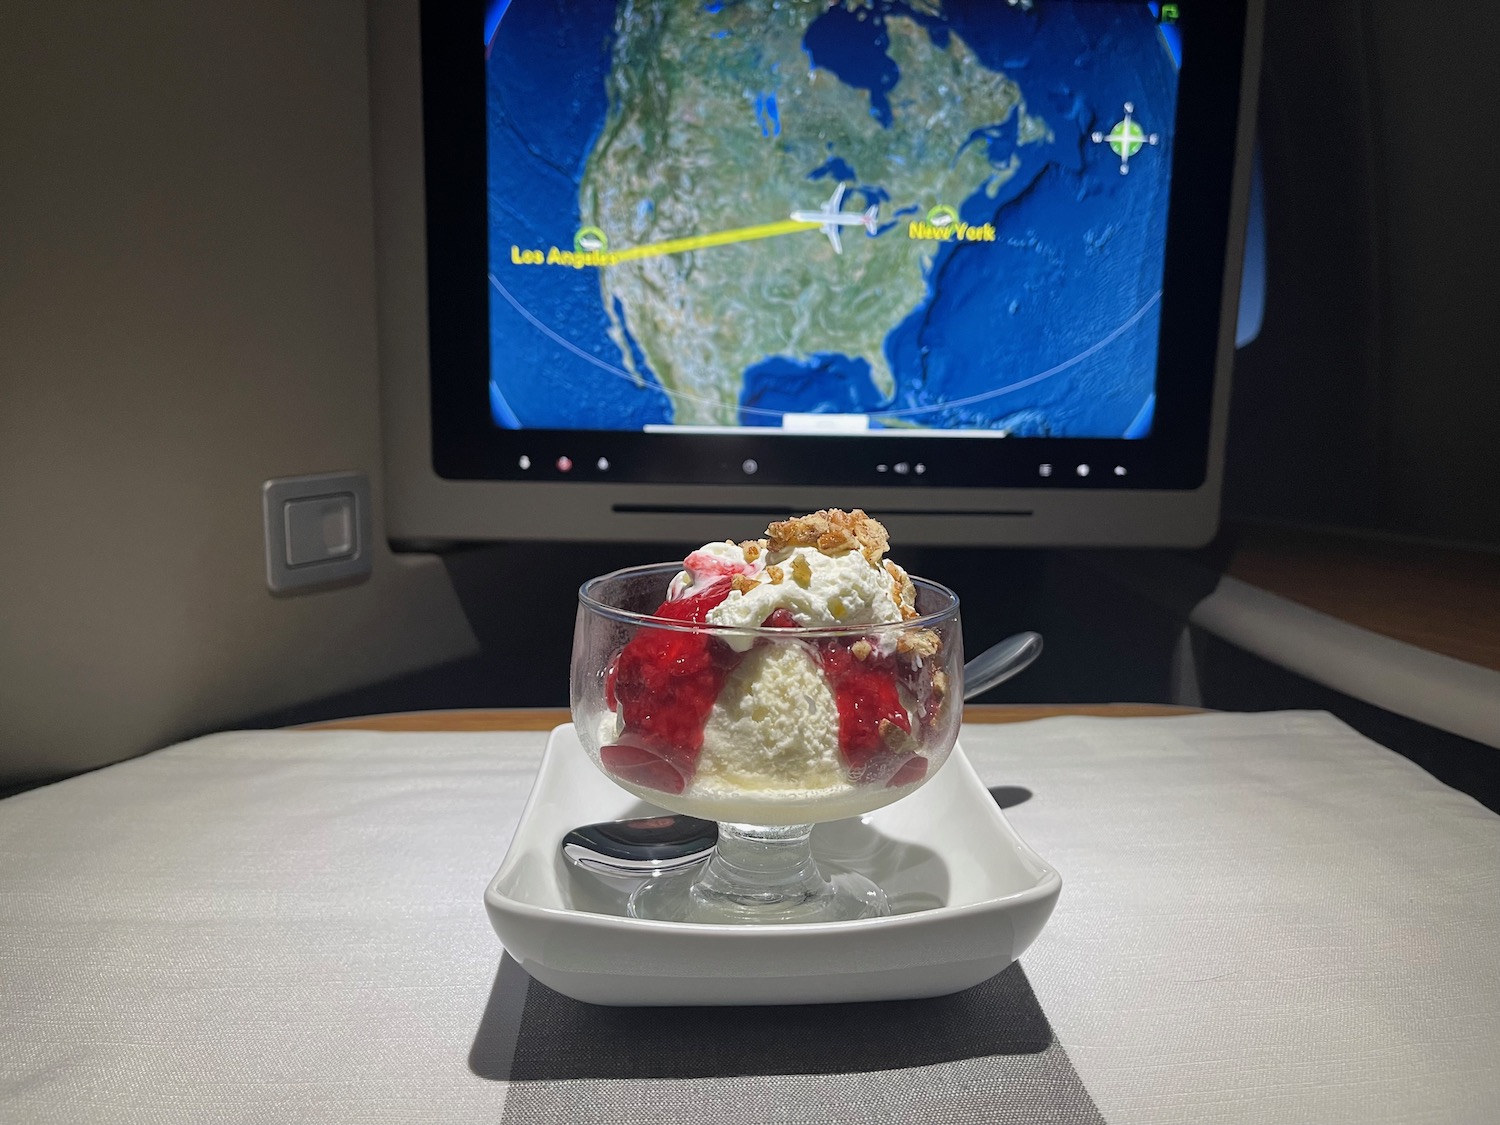 a dish with ice cream and a television on it